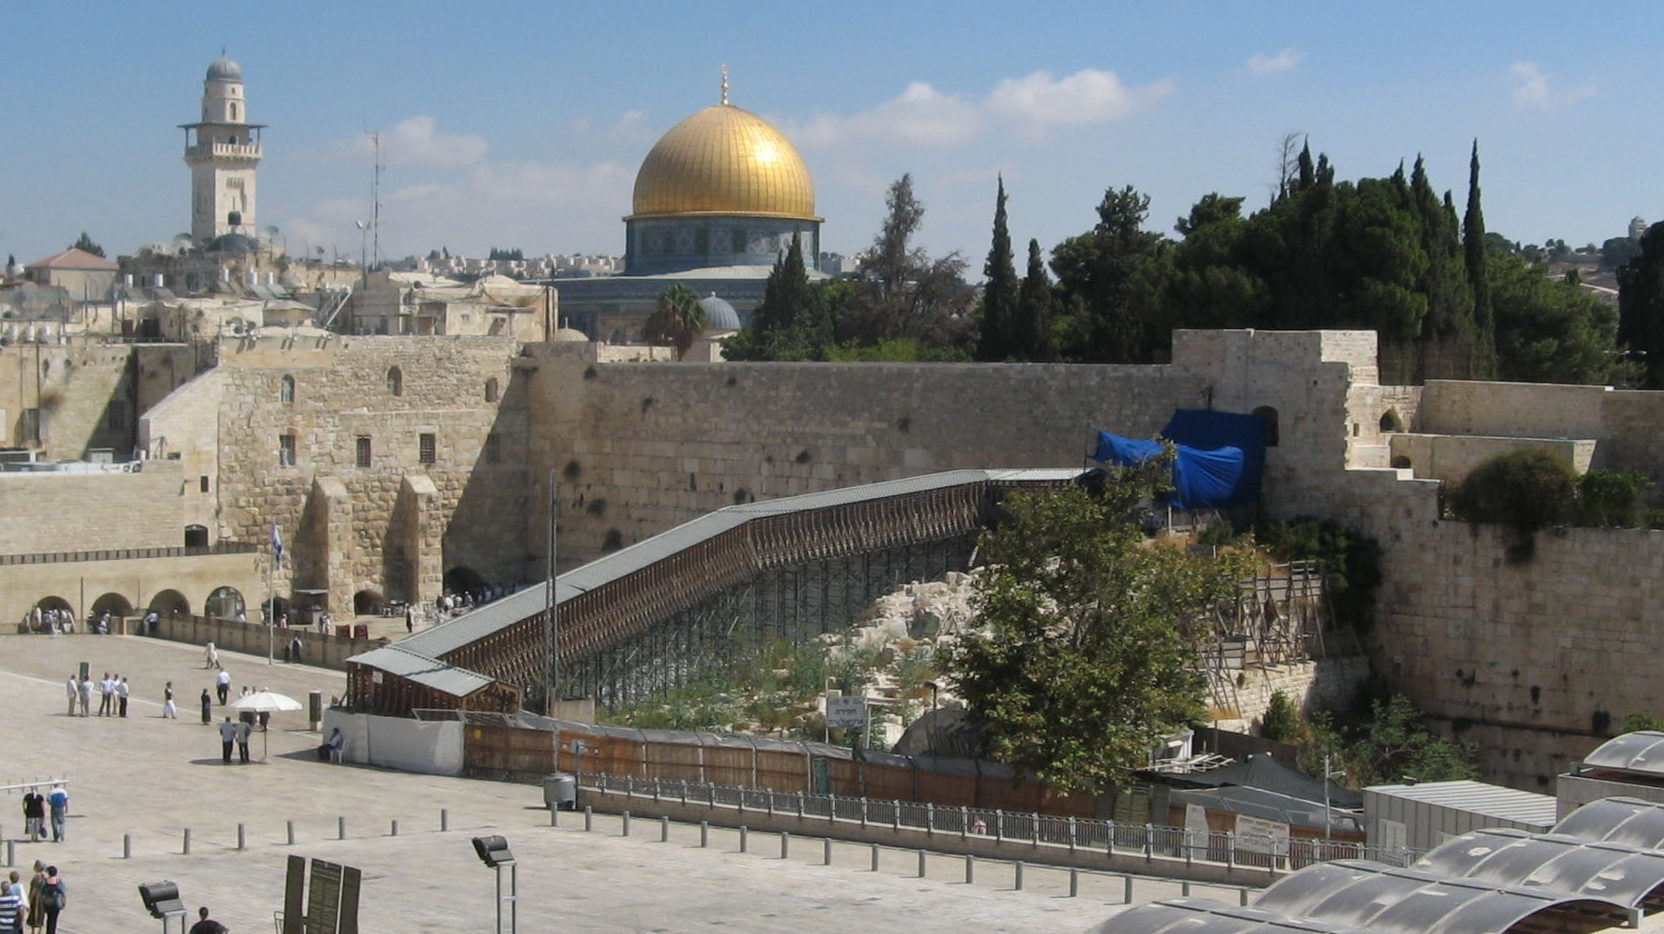 At Jerusalem’s Temple Mount, ‘The Whole World Is a Very Narrow Bridge’